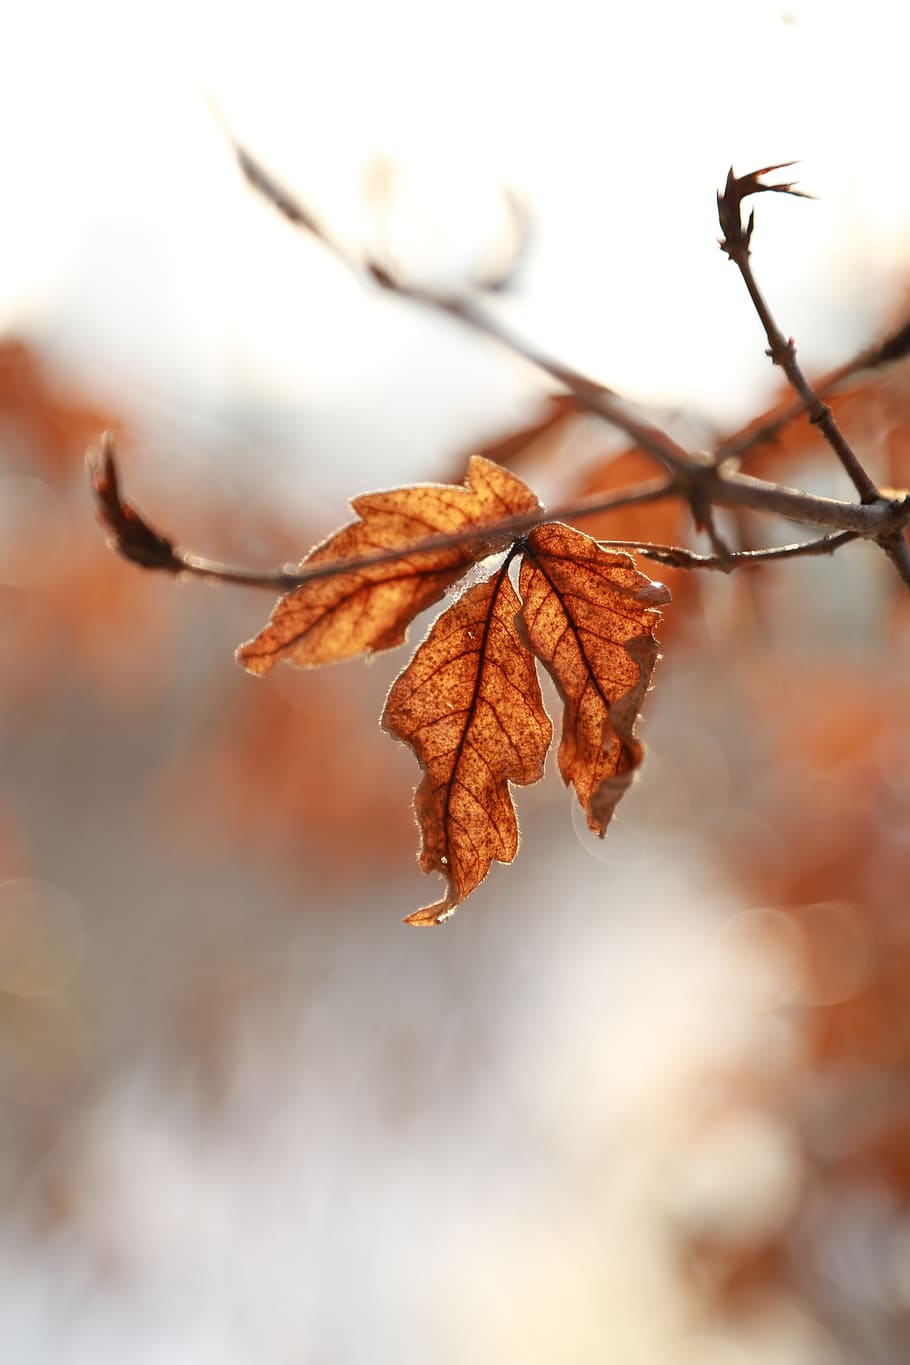 leaves, leaf, autumn, the leaves, autumn leaves, brown, nature, winter, phone wallpaper, plant part